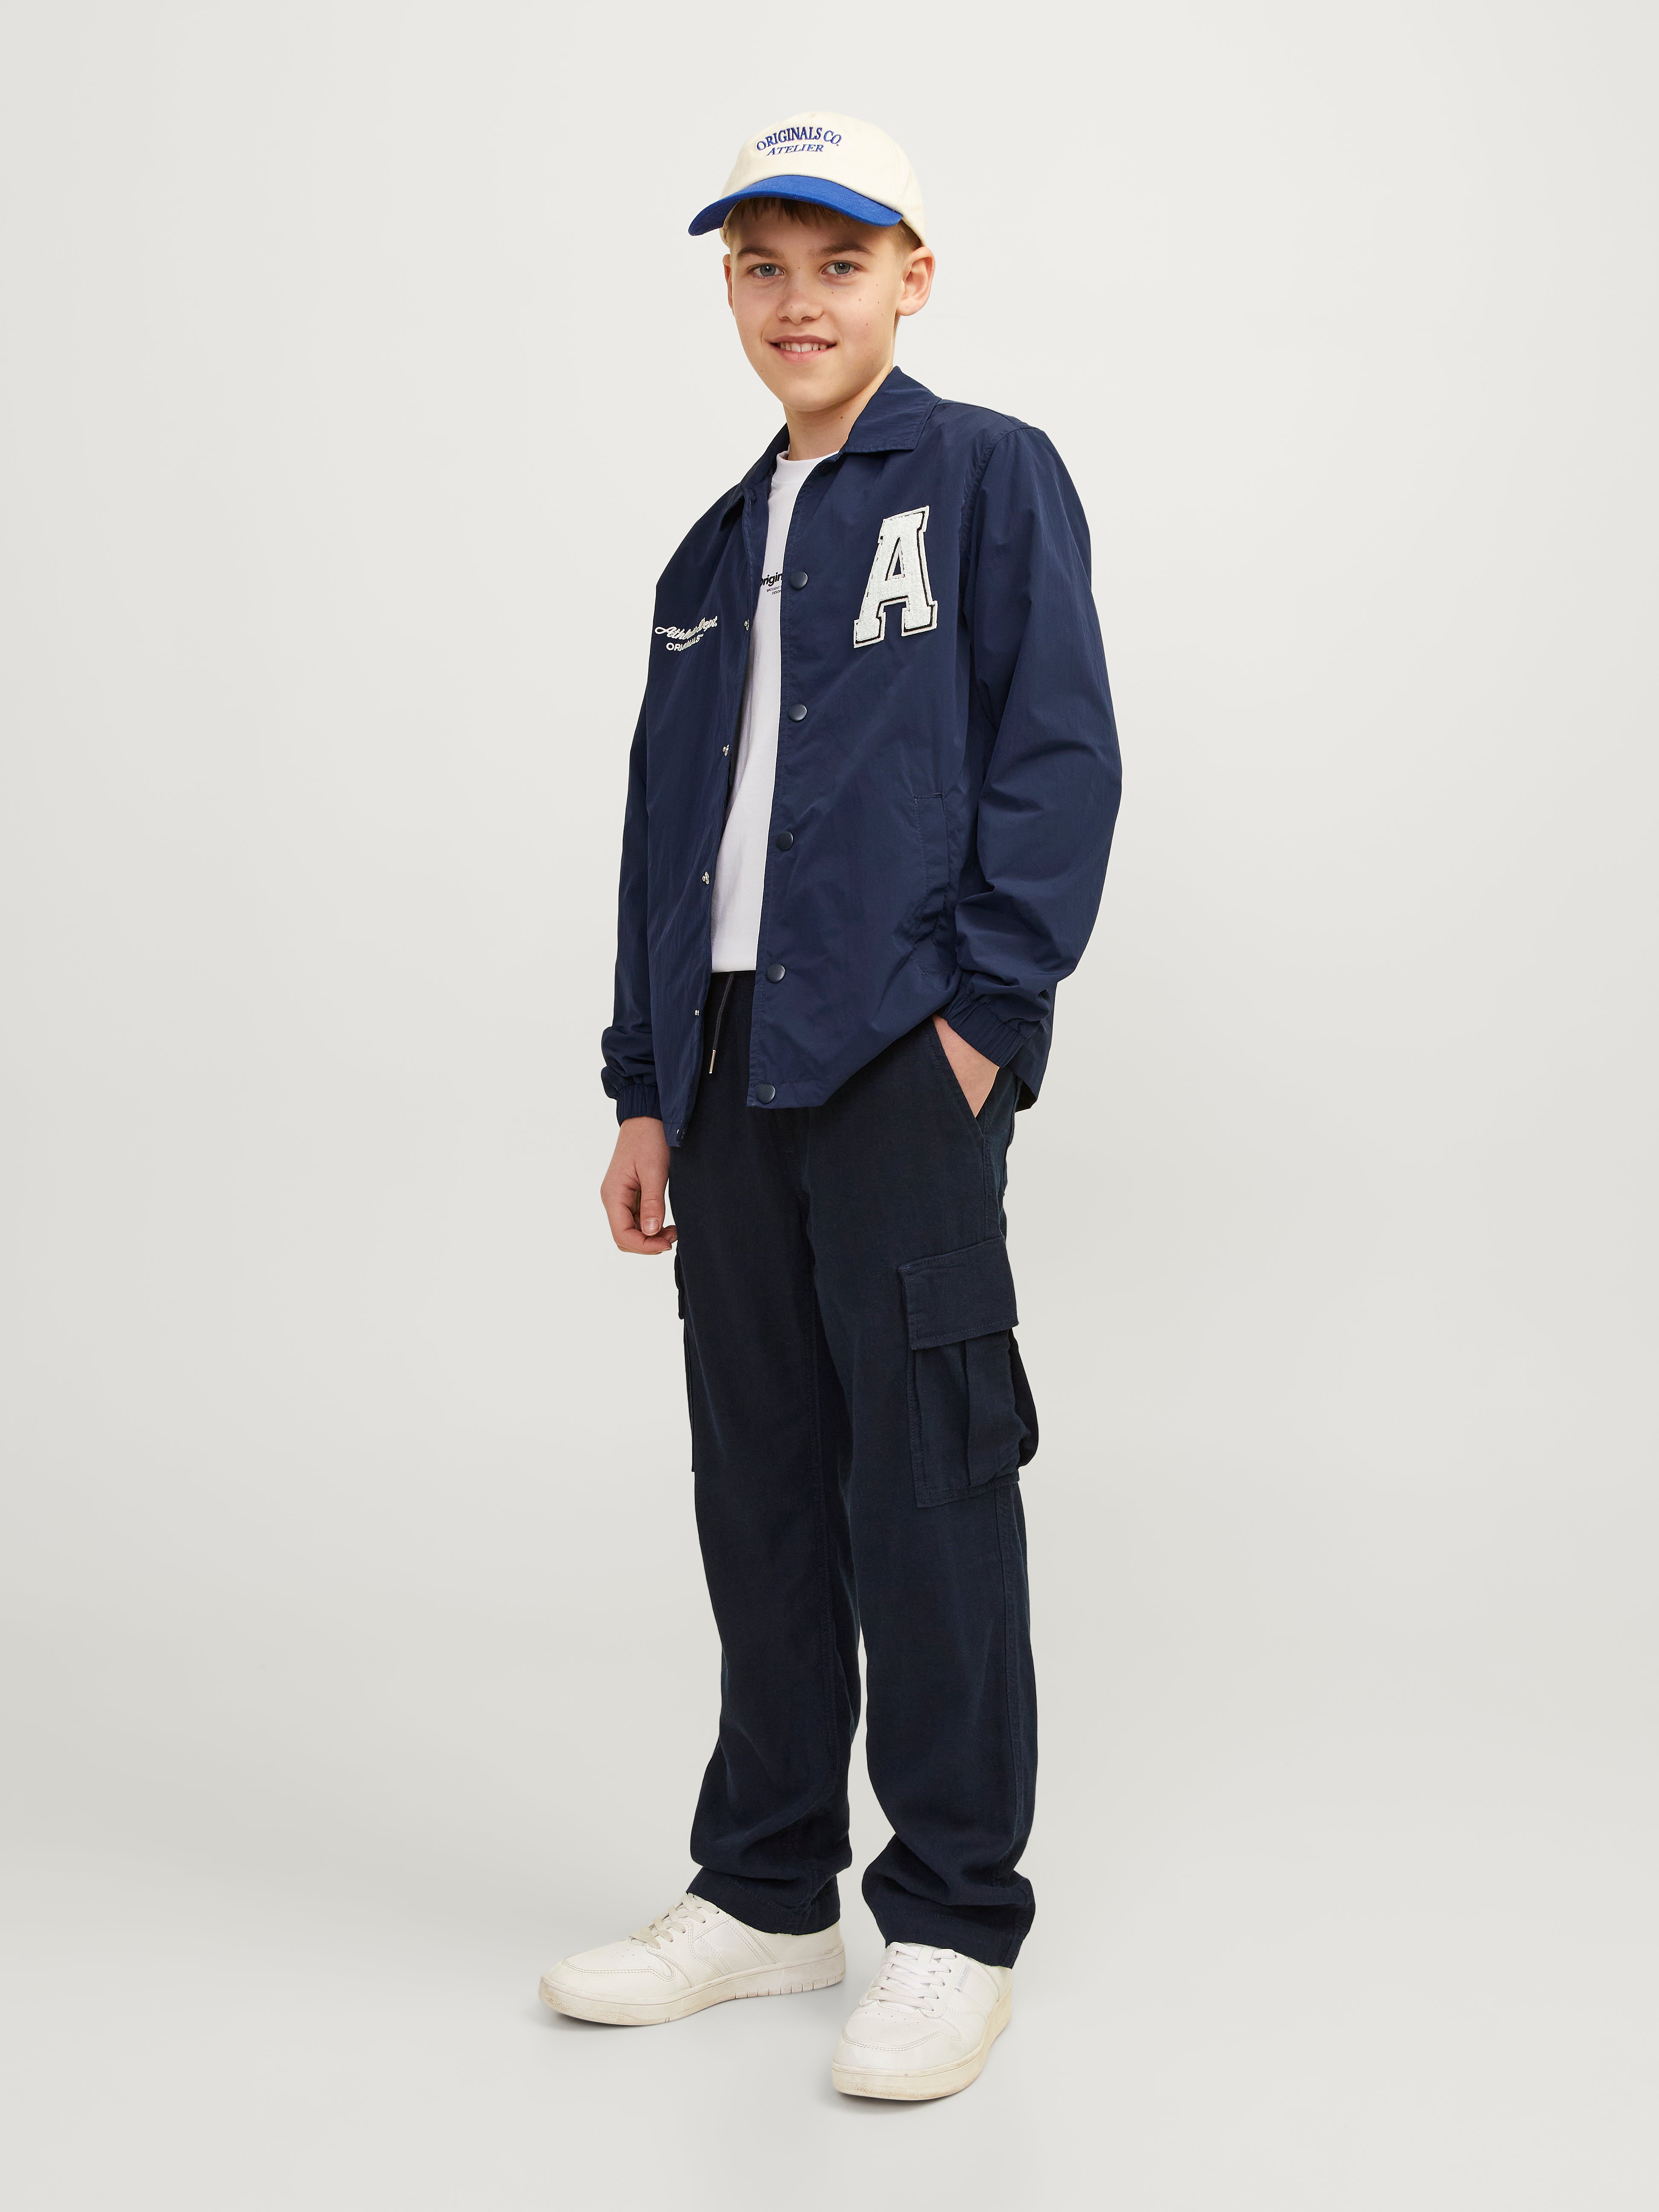 Jacket For boys